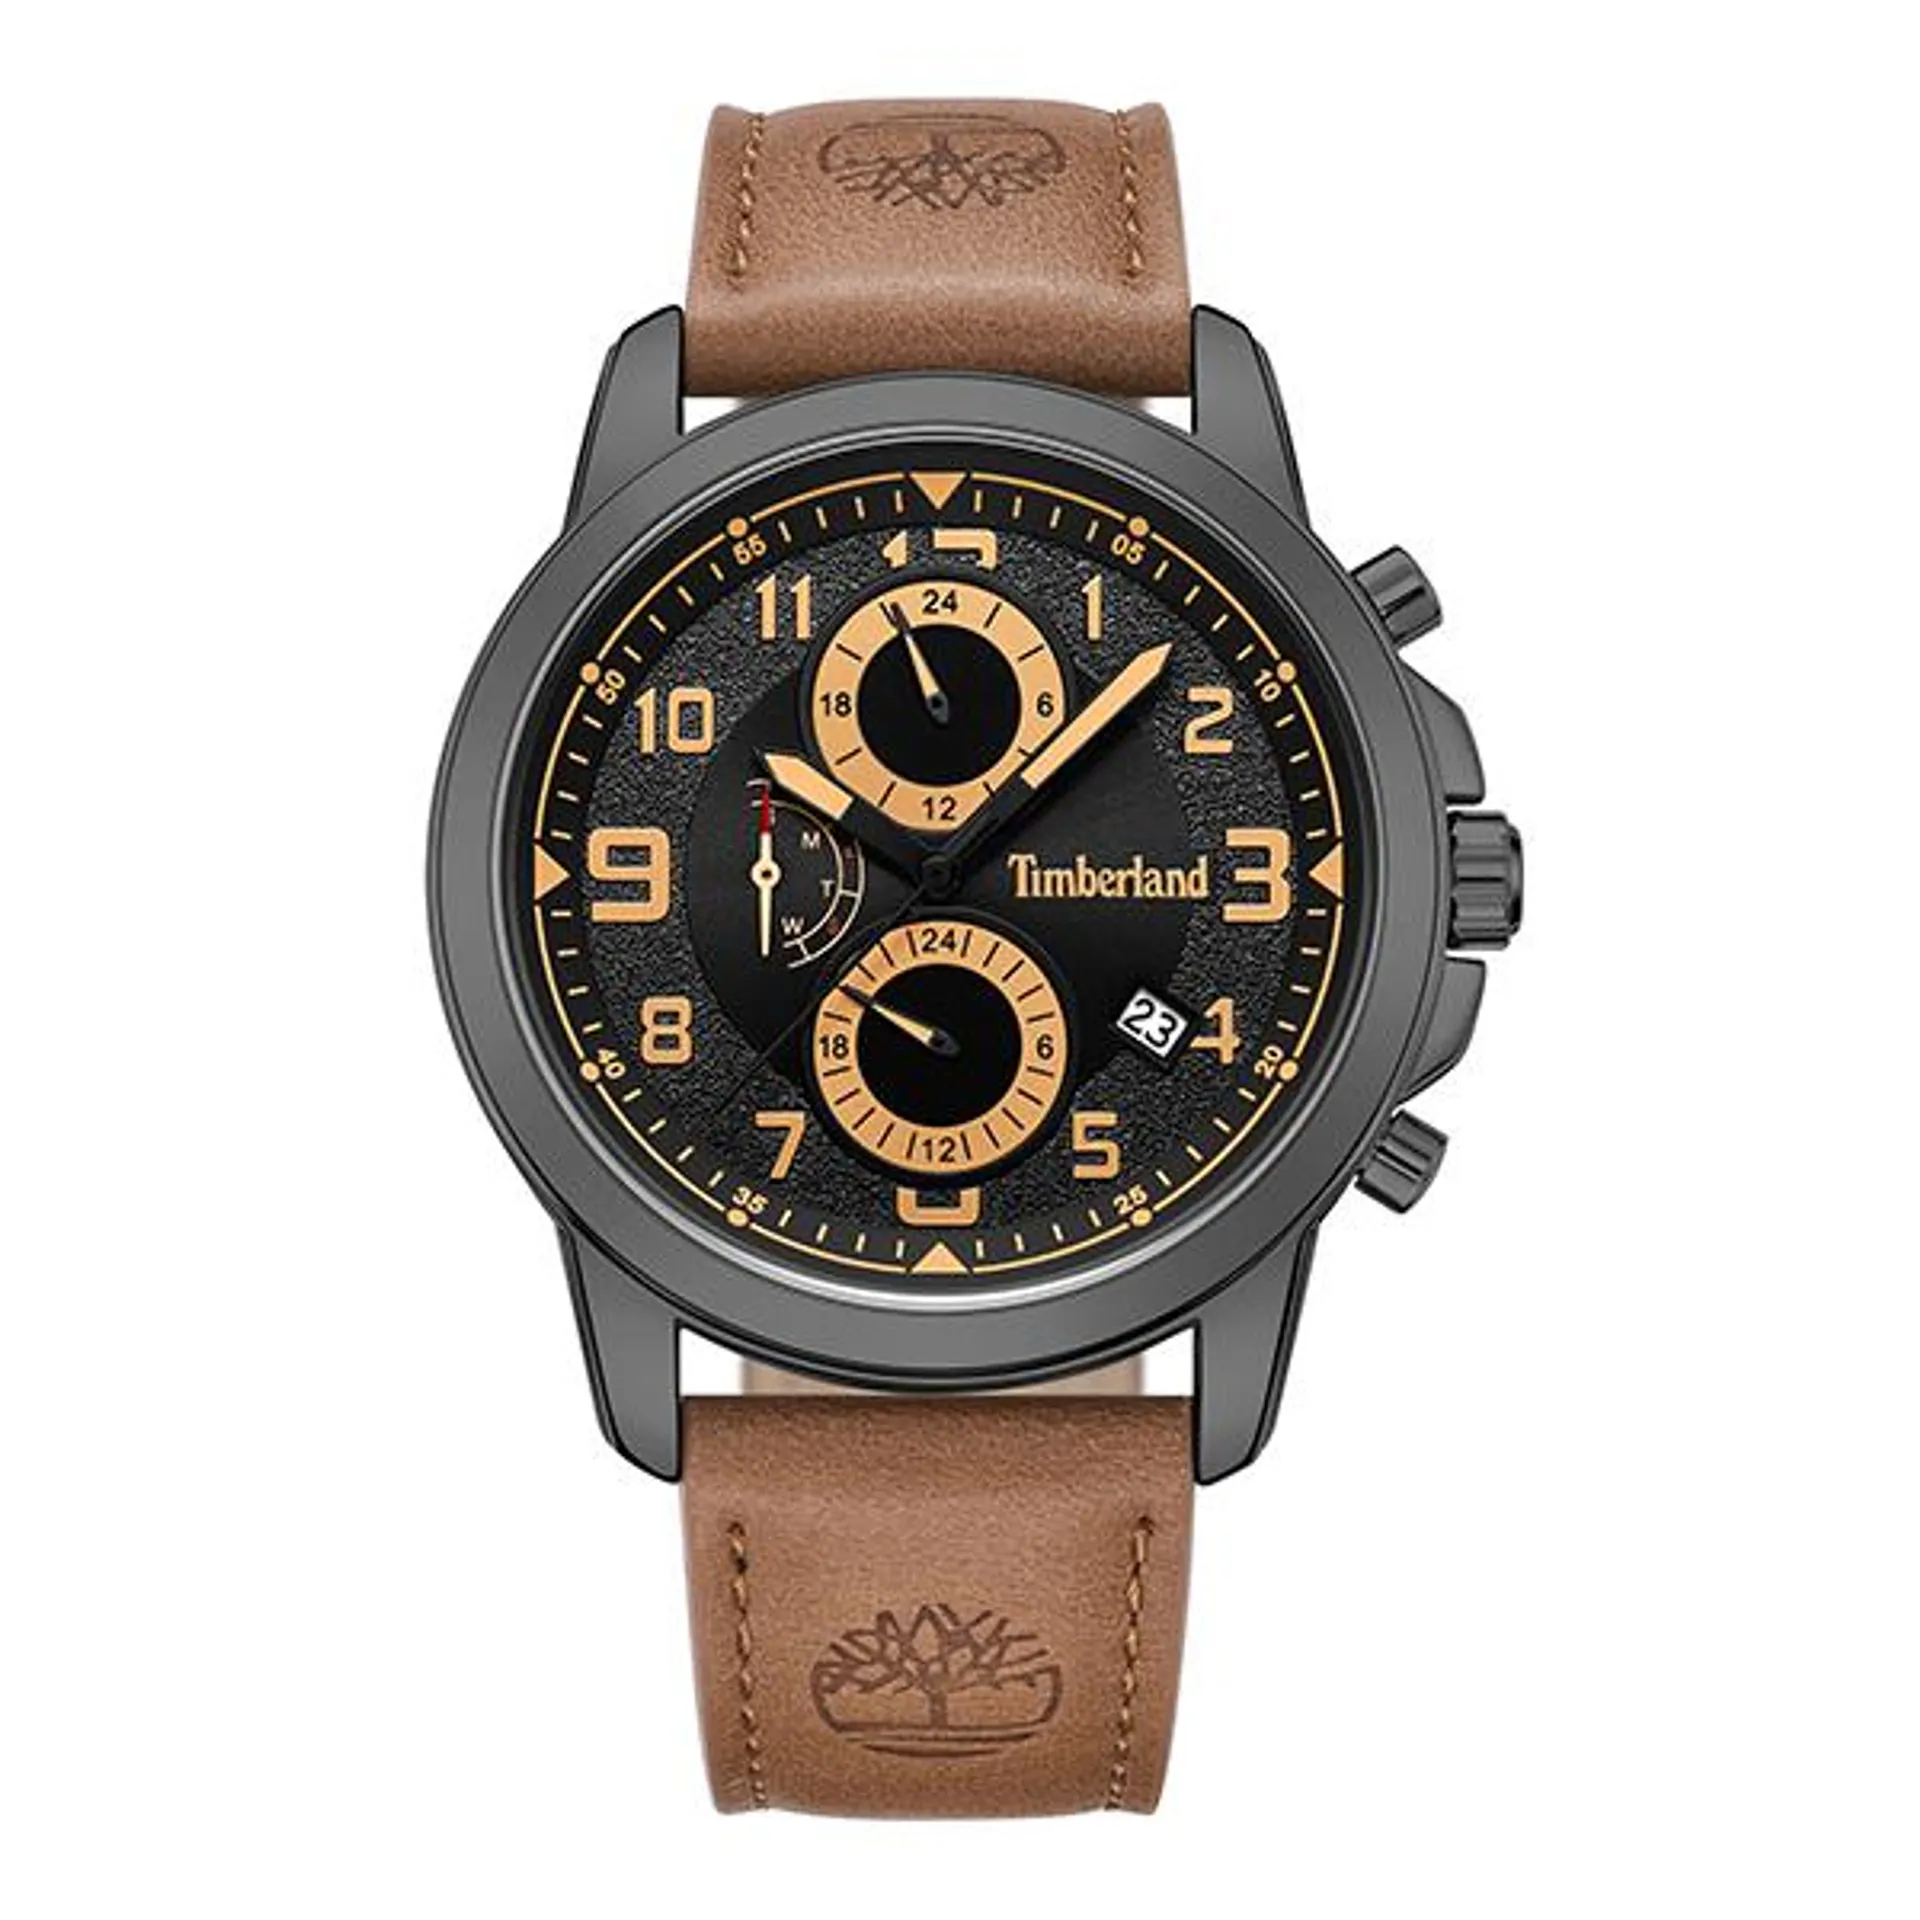 Timberland Gents Lamonine Watch with Genuine Leather Strap